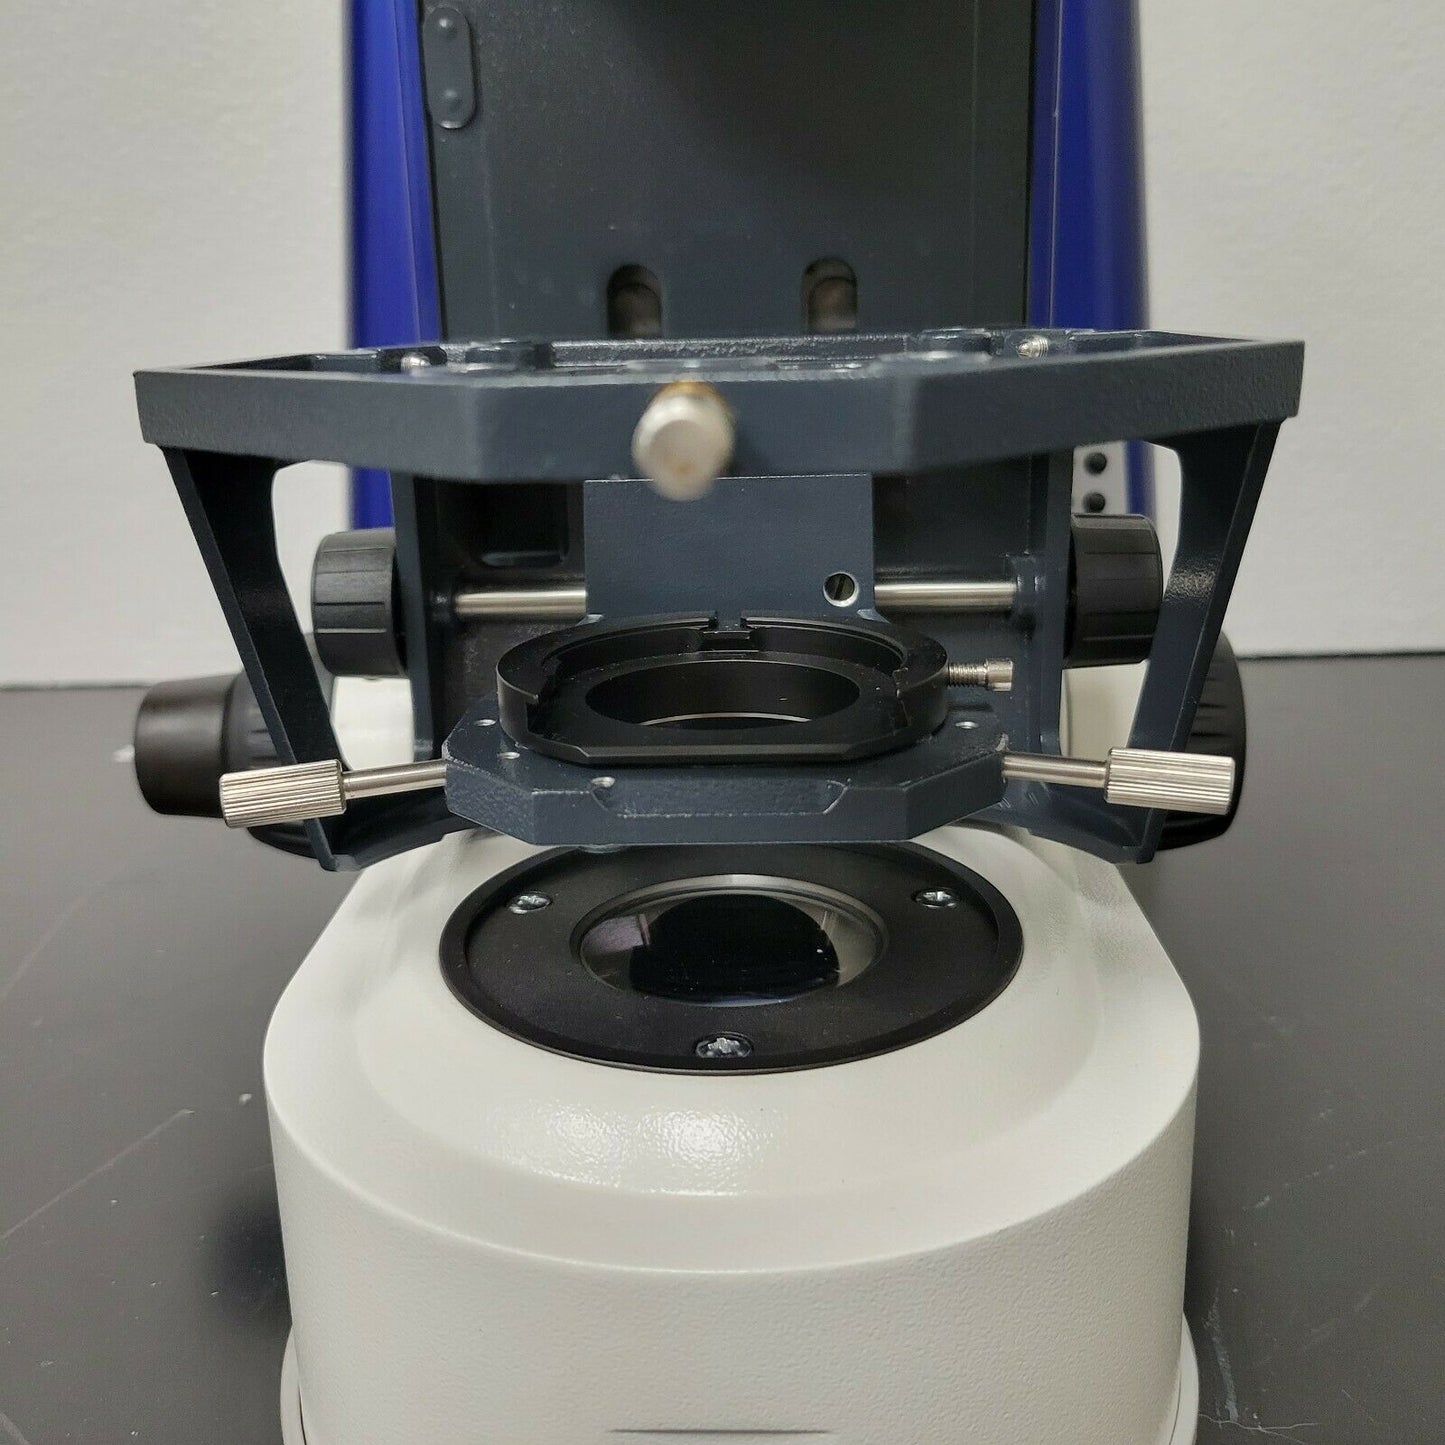 Zeiss Microscope AXIO Imager.A1 Stand for Parts Electronics Nosepiece Focus - microscopemarketplace